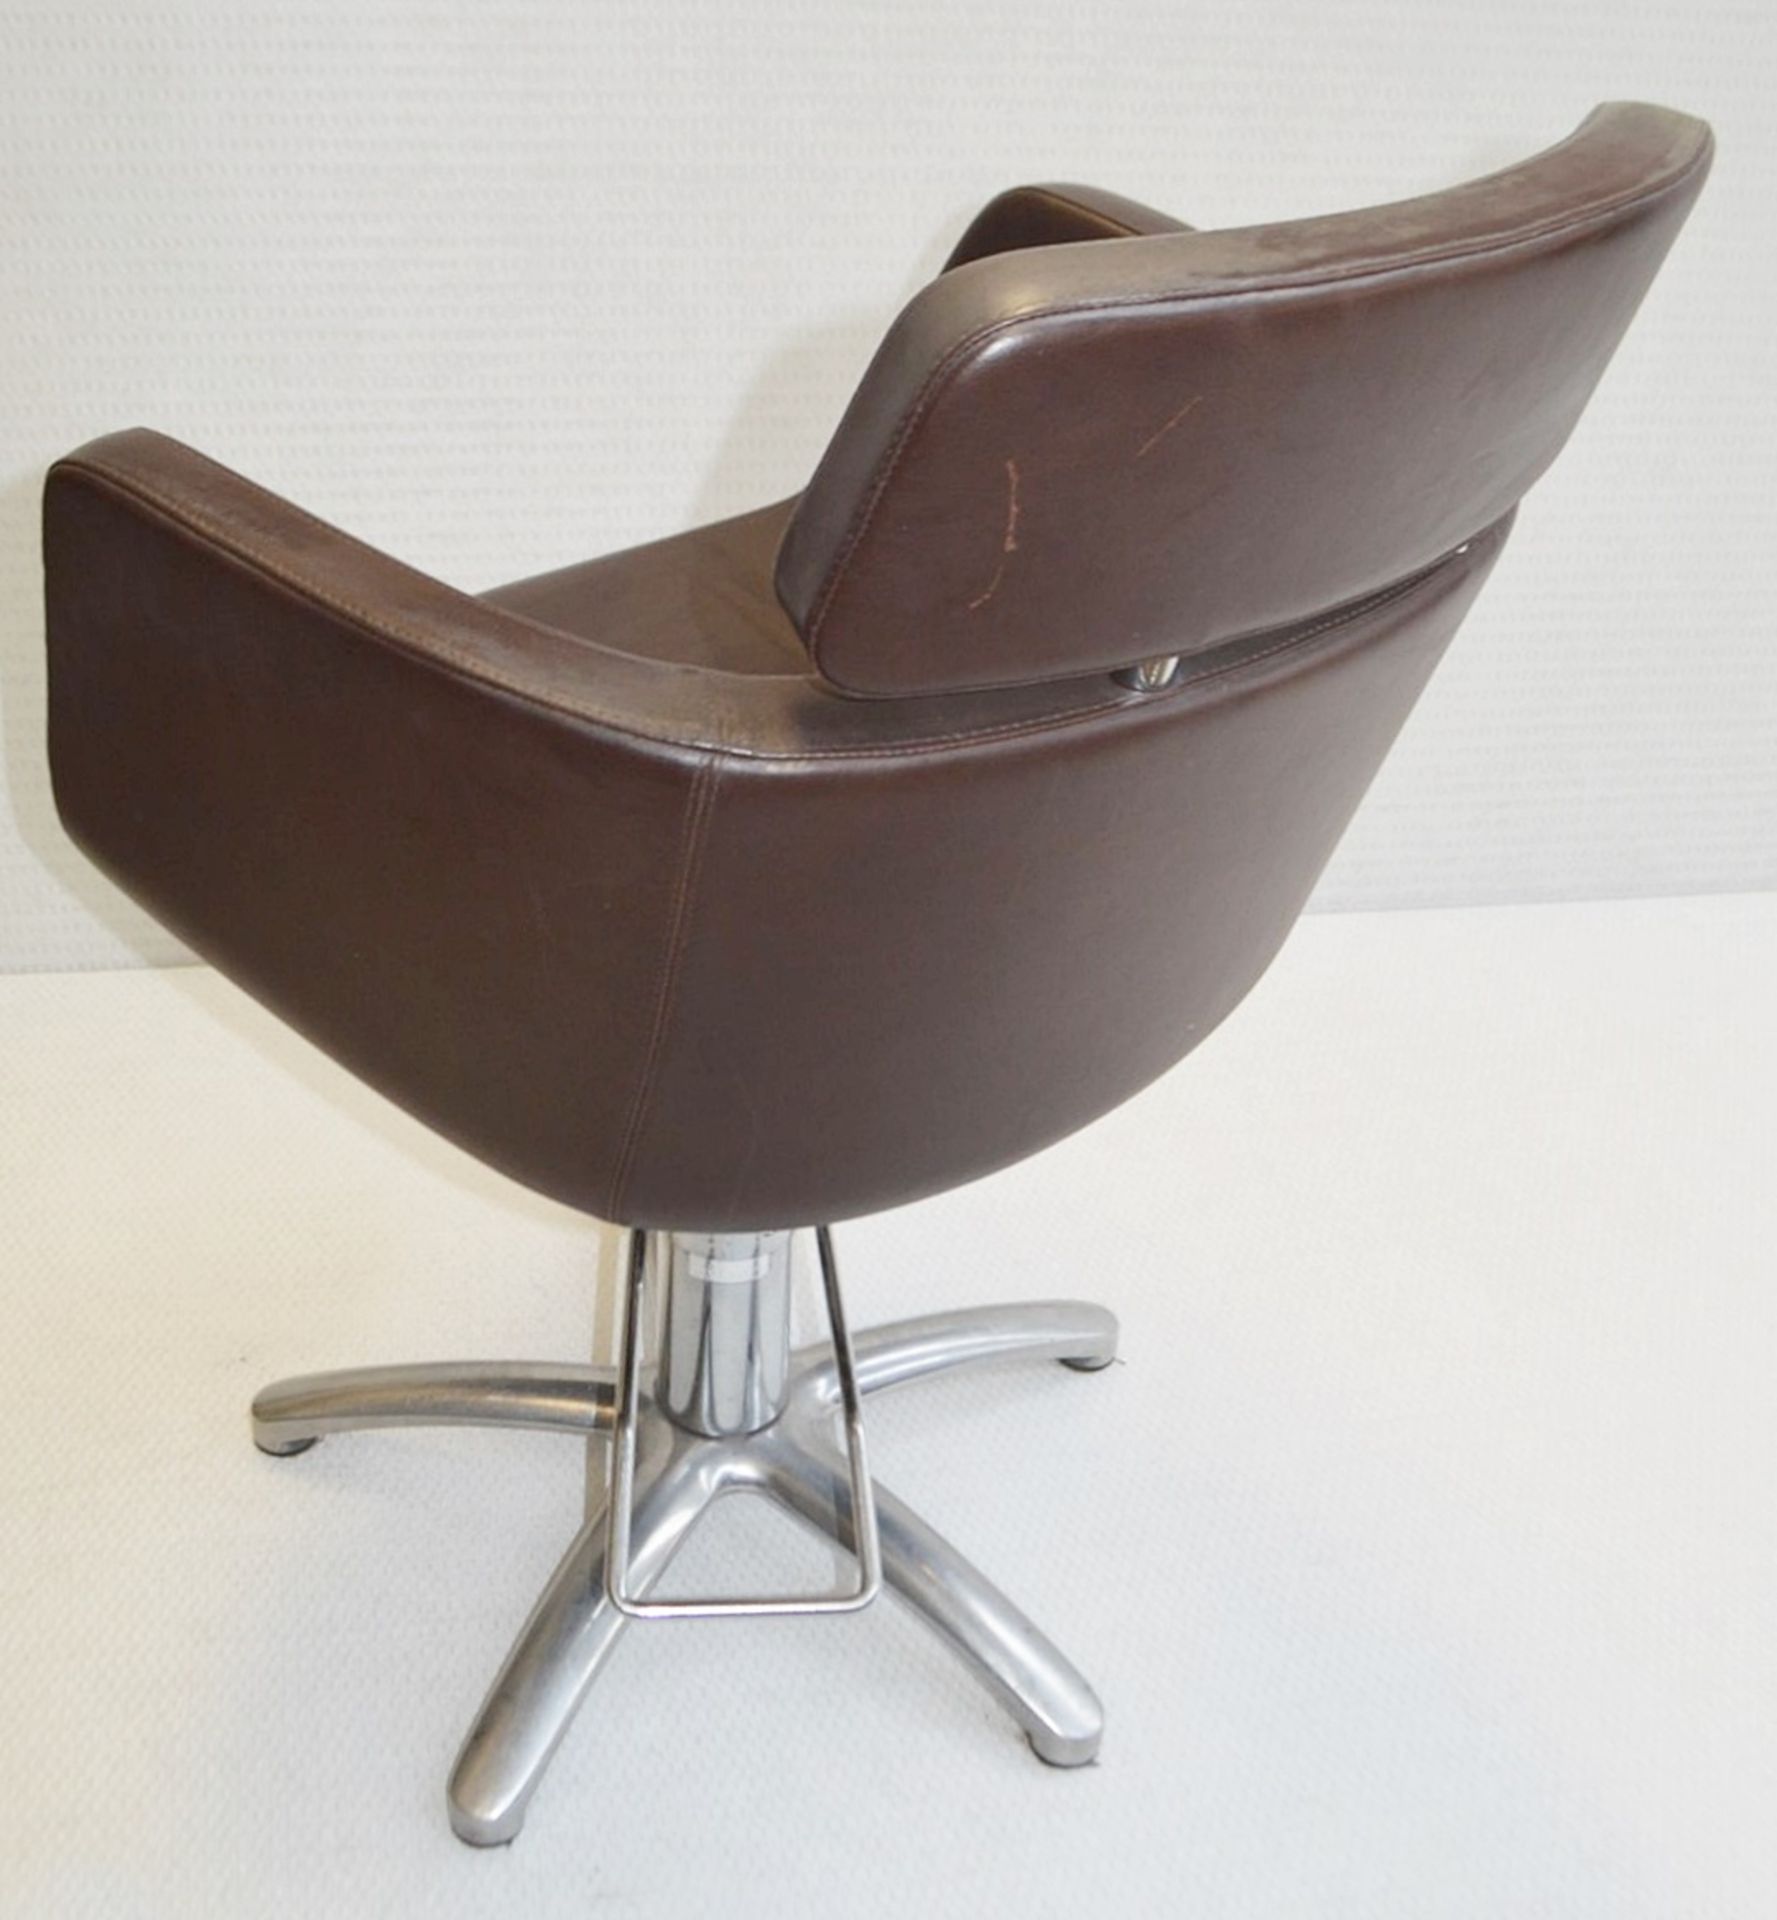 5 x Malet Branded Professional Hairdressing Salon Swivel Chairs In Brown - Includes 4 x Foot Rests - Image 7 of 7